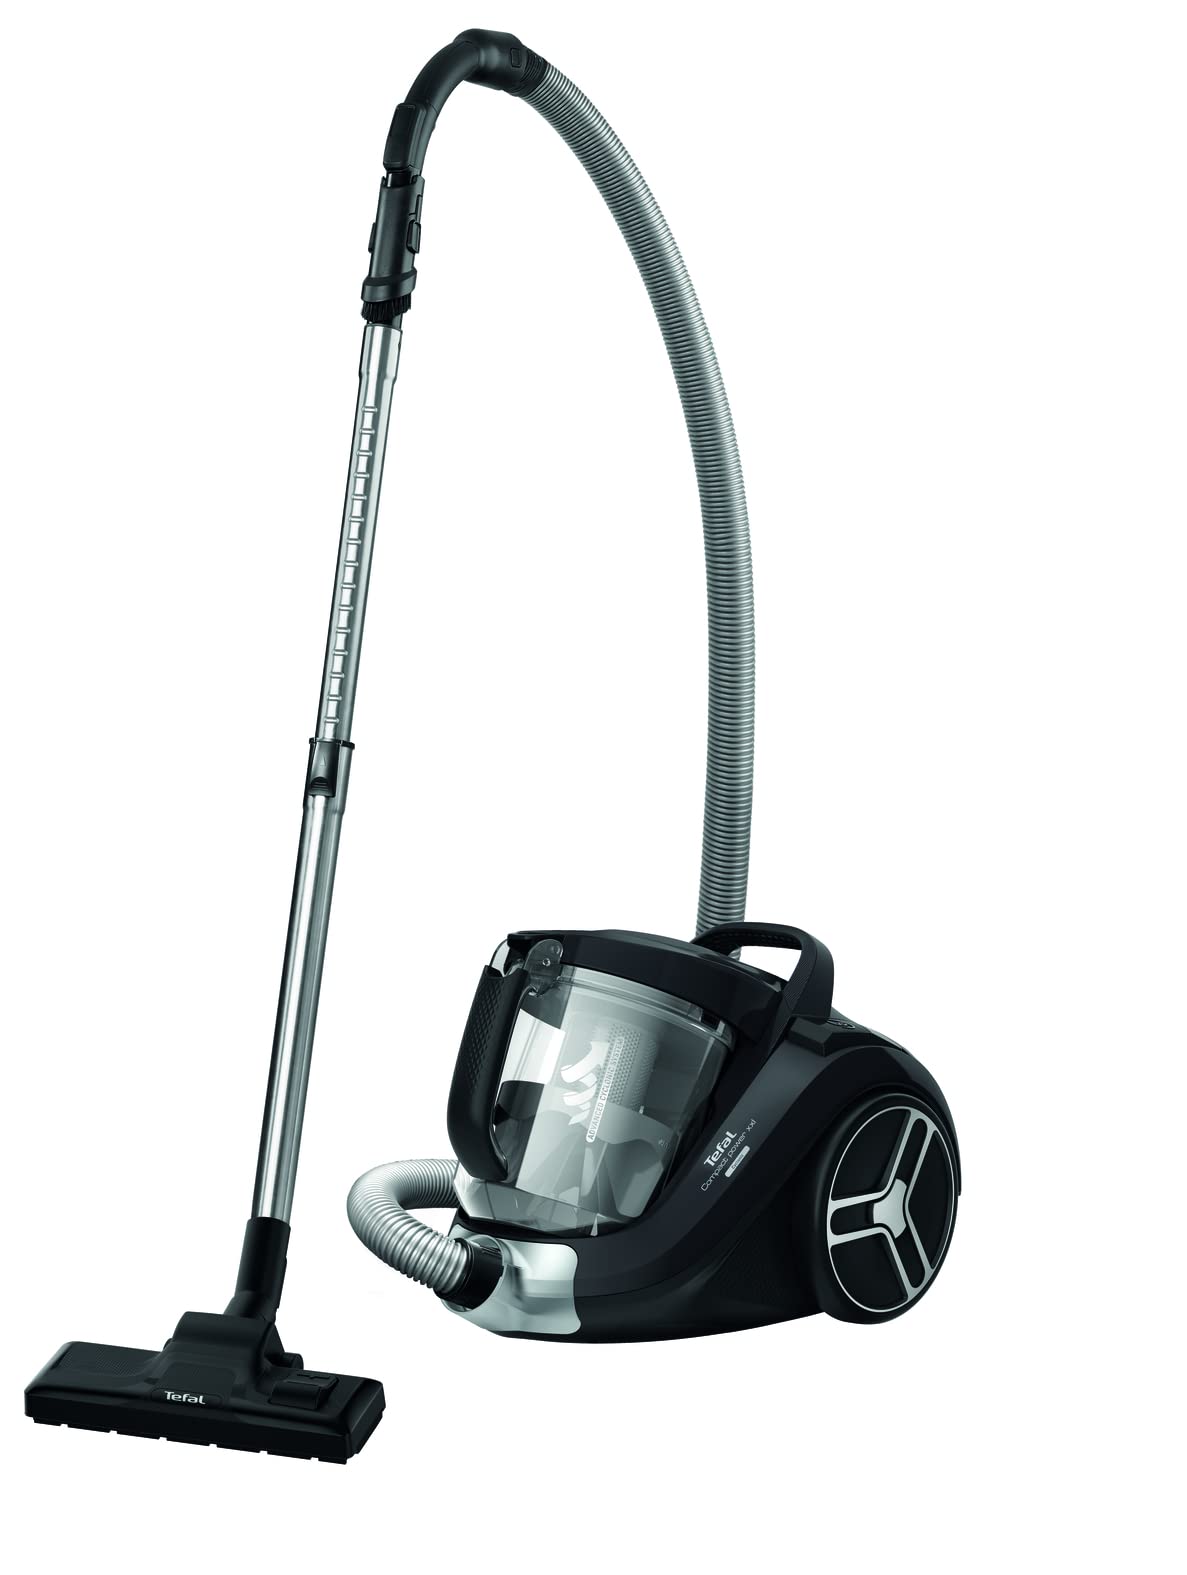 Tefal Compact Power XXL Bagless Vacuum Cleaner, 2.5 Litre , Black/Silver